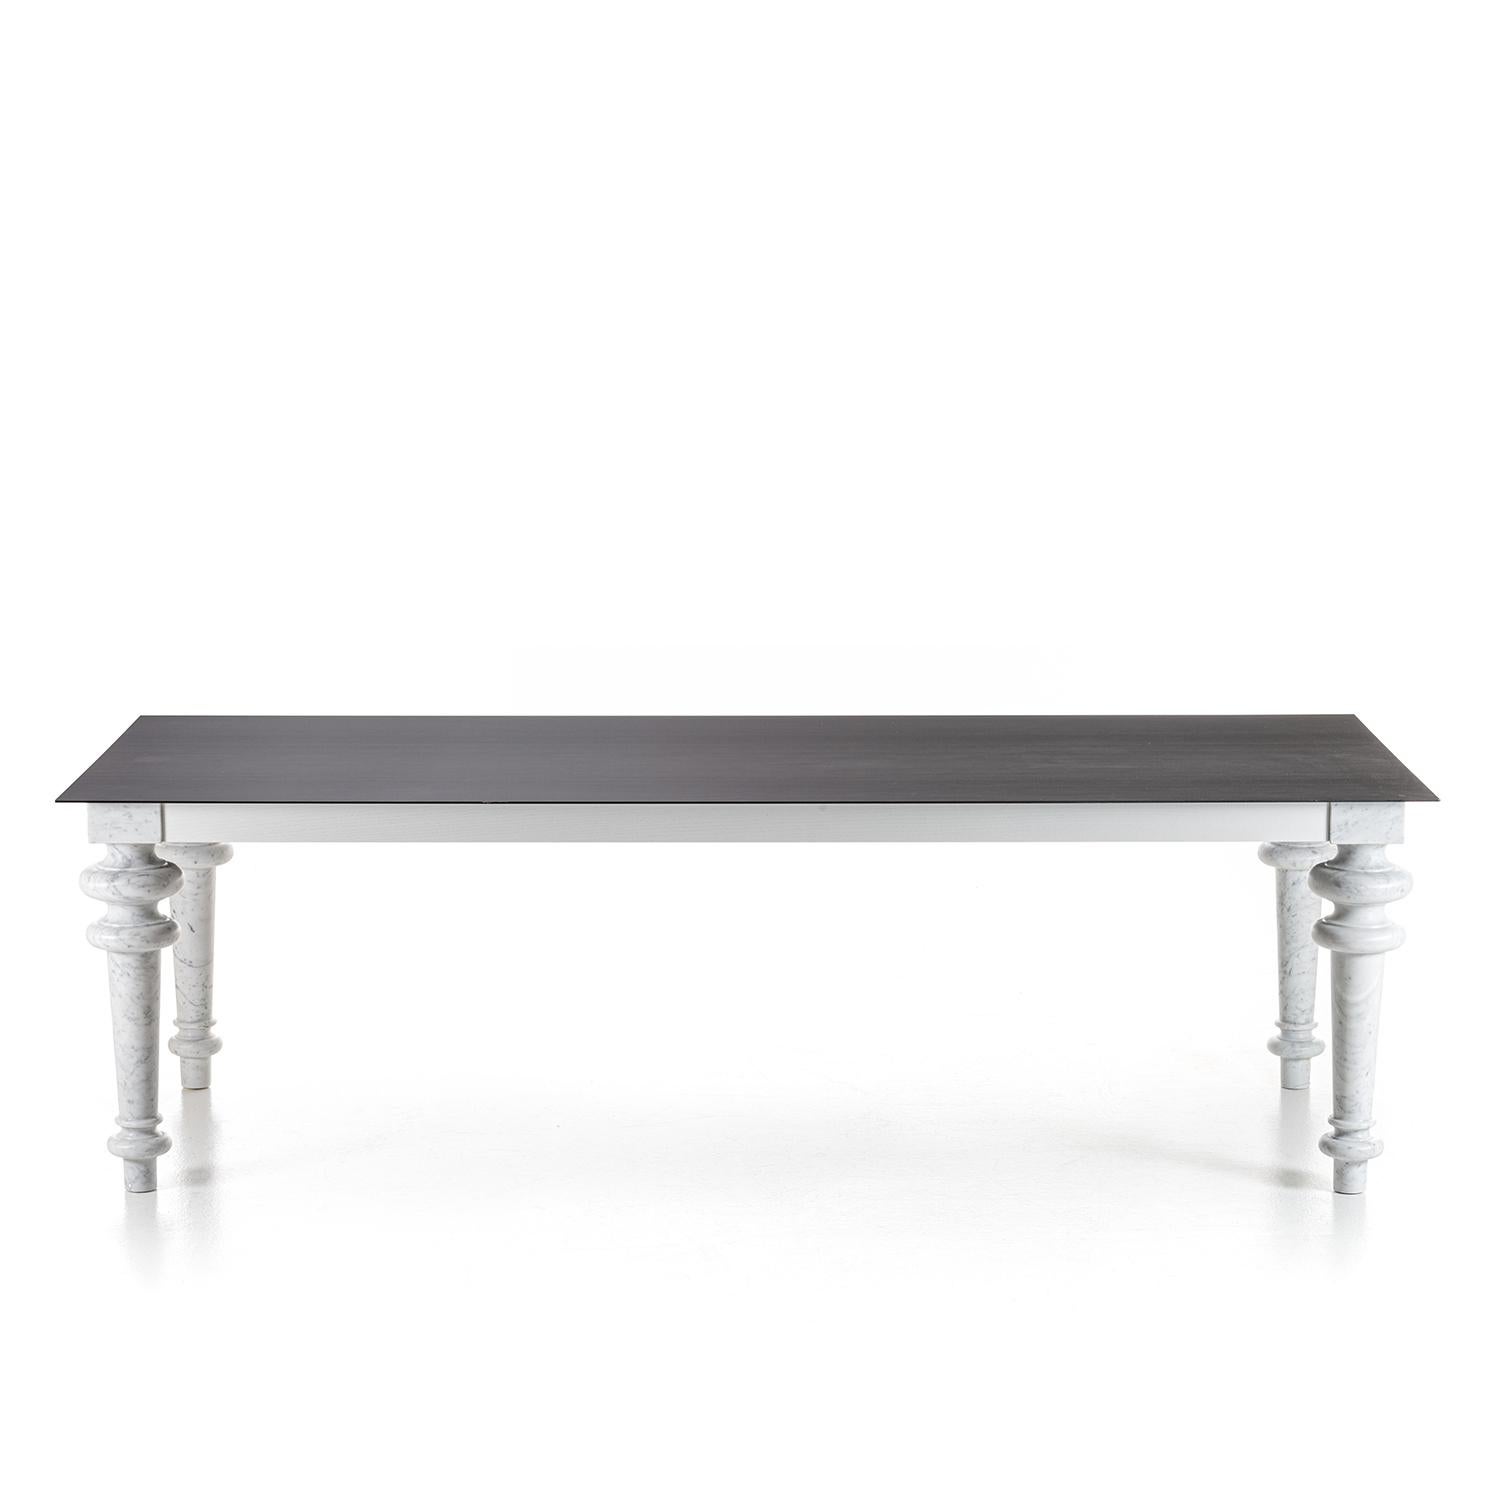 Rony dining table with waxed iron plate top, 4mm thickness,
fixed on white lacquered oak under top frame and with 4 feet
in polished white Carrara marble.
Also available with white Carrara marble top, 20mm thickness,
on request.